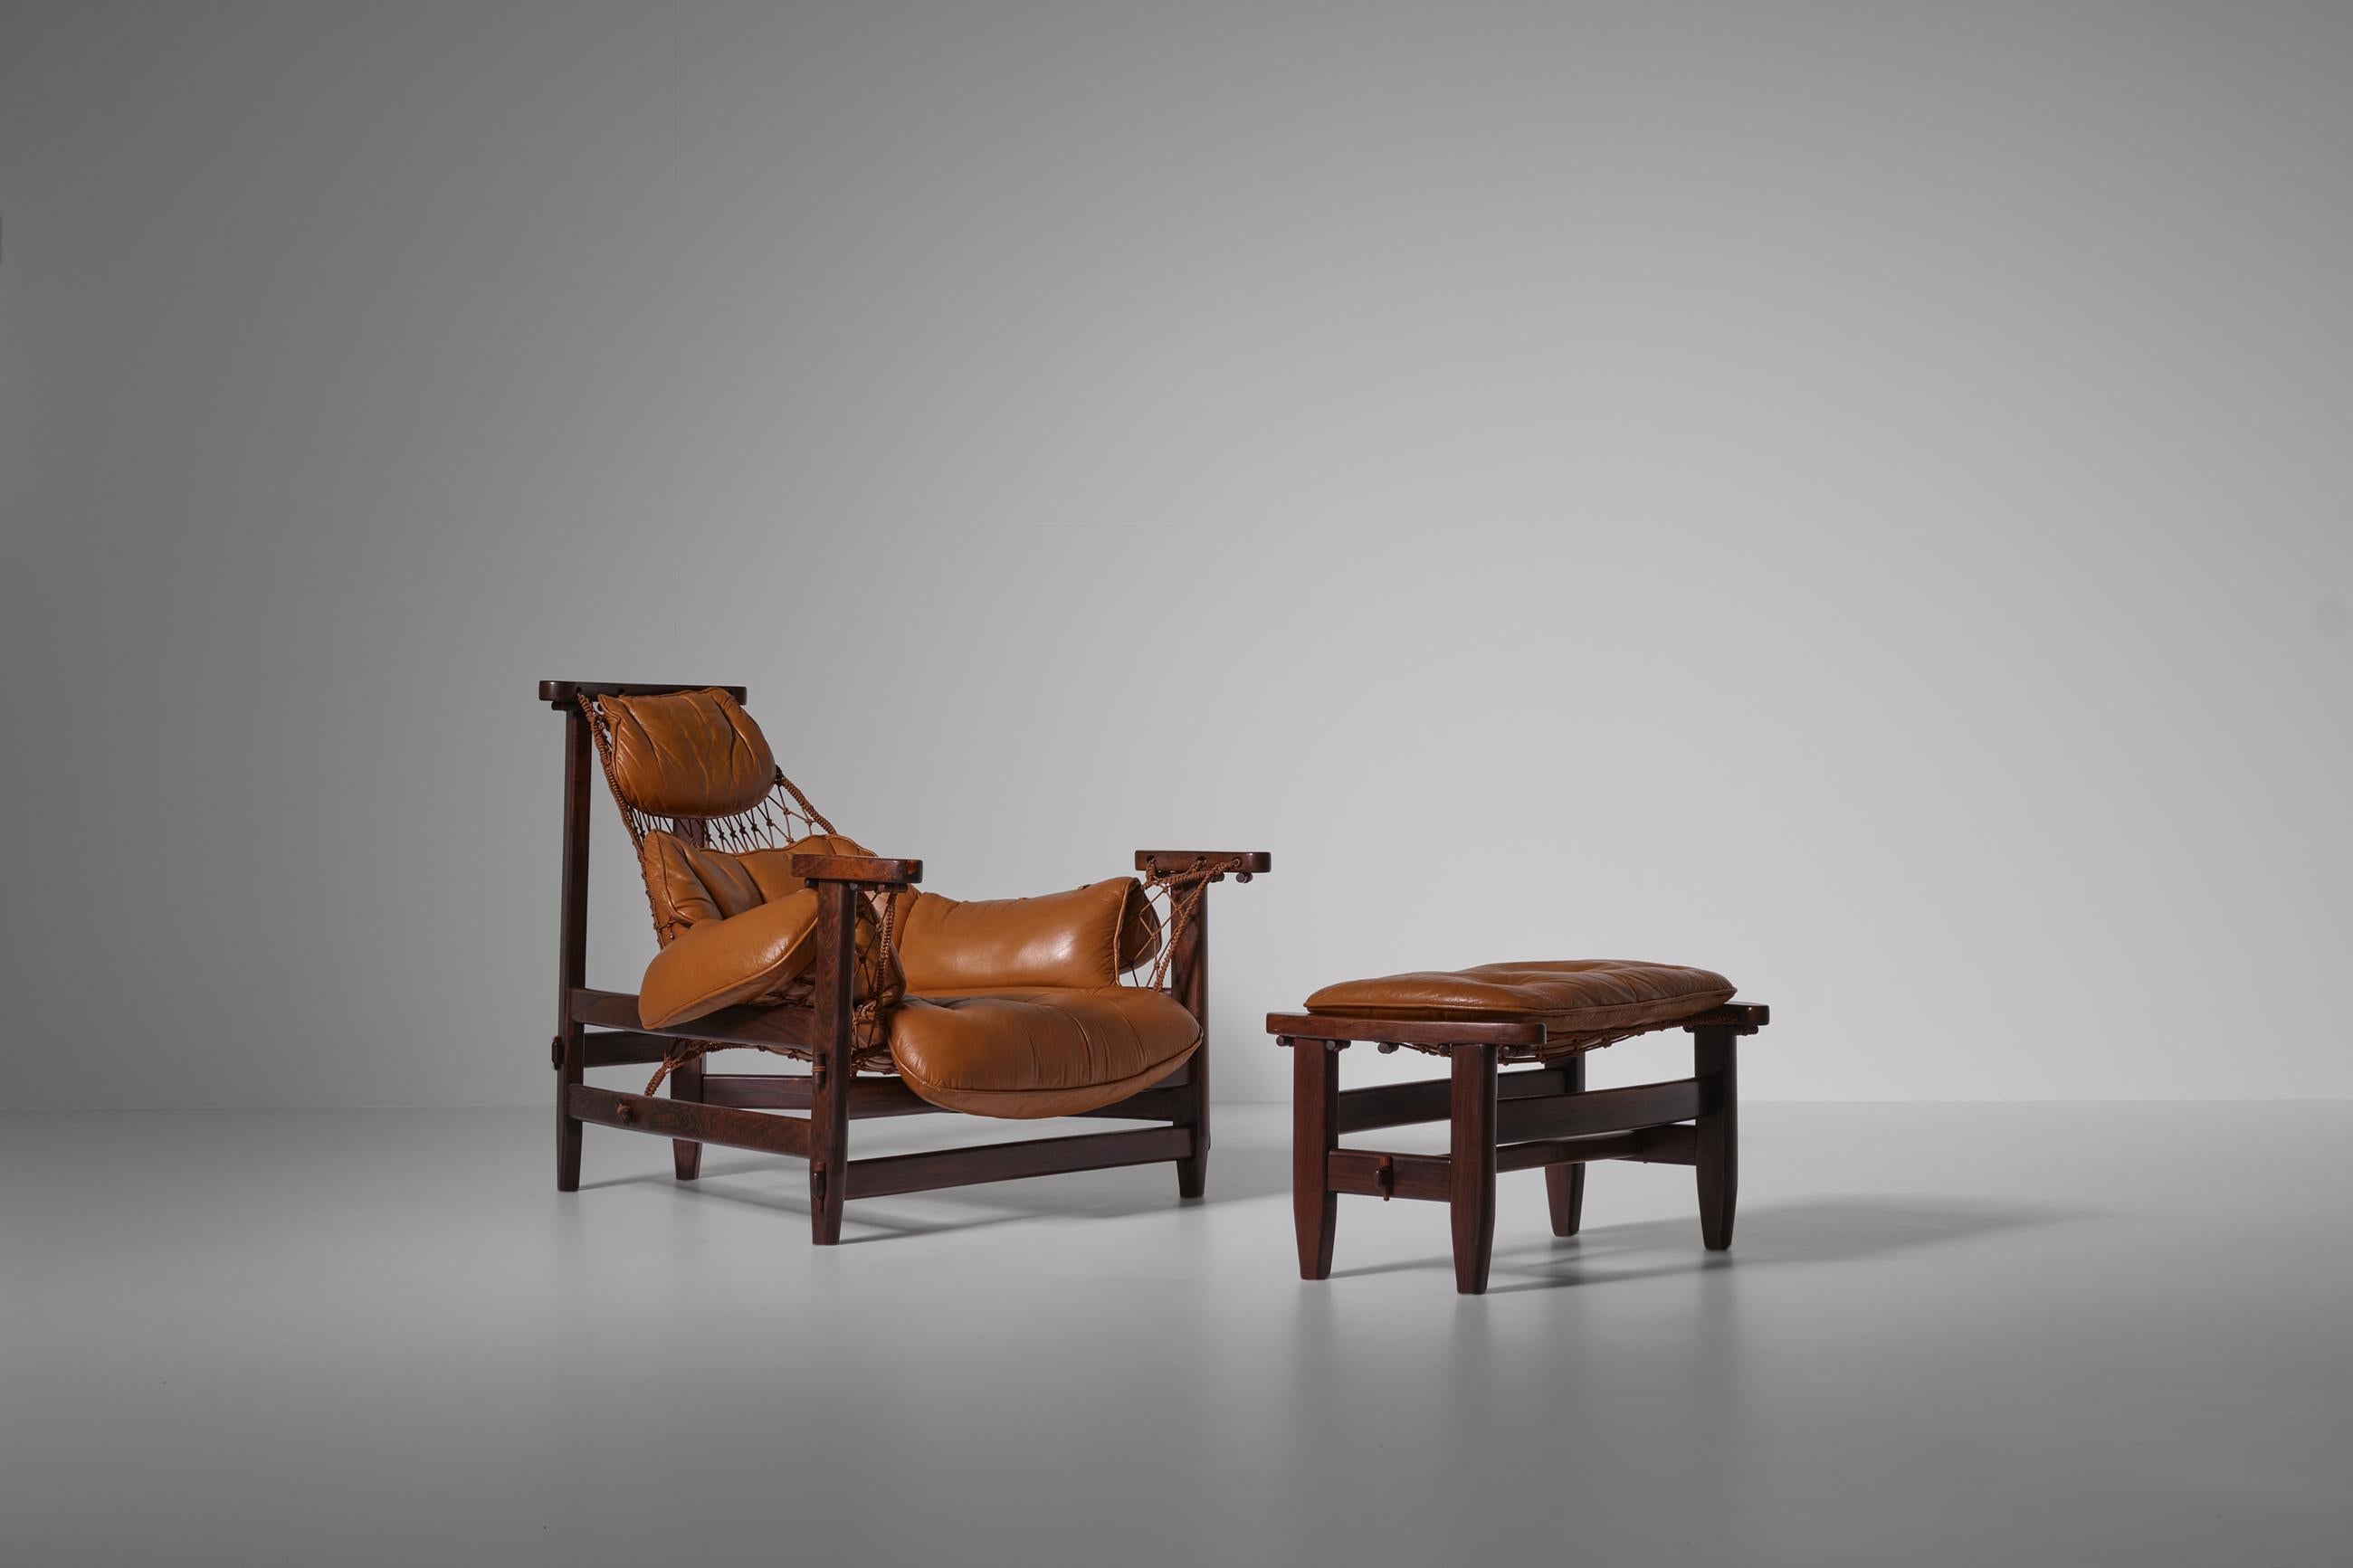 Stunning lounge chair and ottoman by Jean Gillon, Brazil 1968. Spectacular typical Brazilian Mid-Century modern design executed in Fine solid Jacaranda wood with a sling seat made of knotted rope and original Cognac colored leather cushions. The